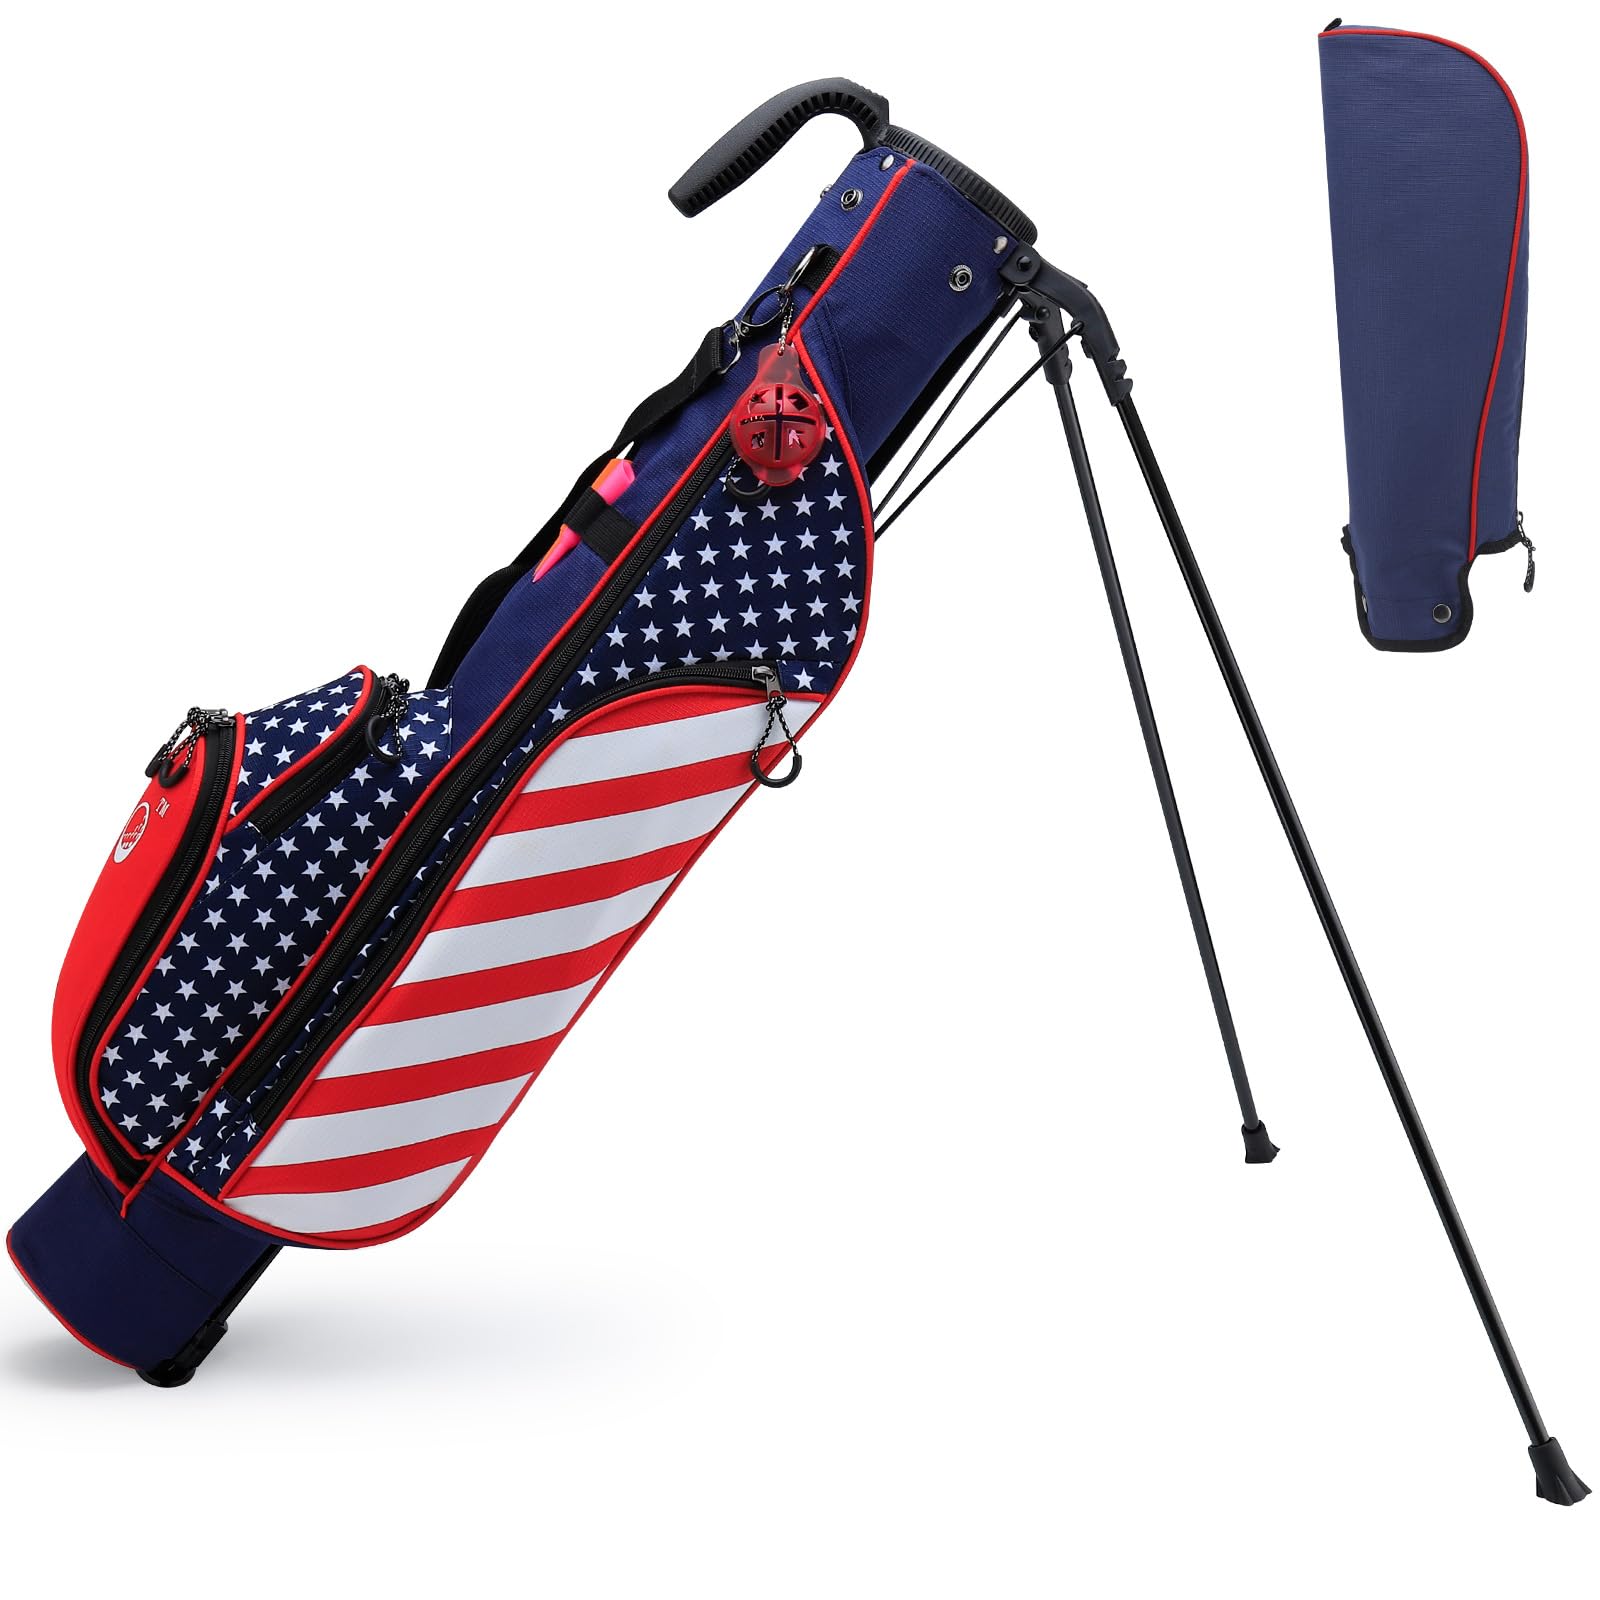 

Golf Stand Bag, Lightweight Golf Club Bags With Stand, Detachable Strap, Small Carry Bags With 4 Pockets And Rain Hood, Ideal For Driving Range, Quick 9 And Par 3 Course, Usa Flag